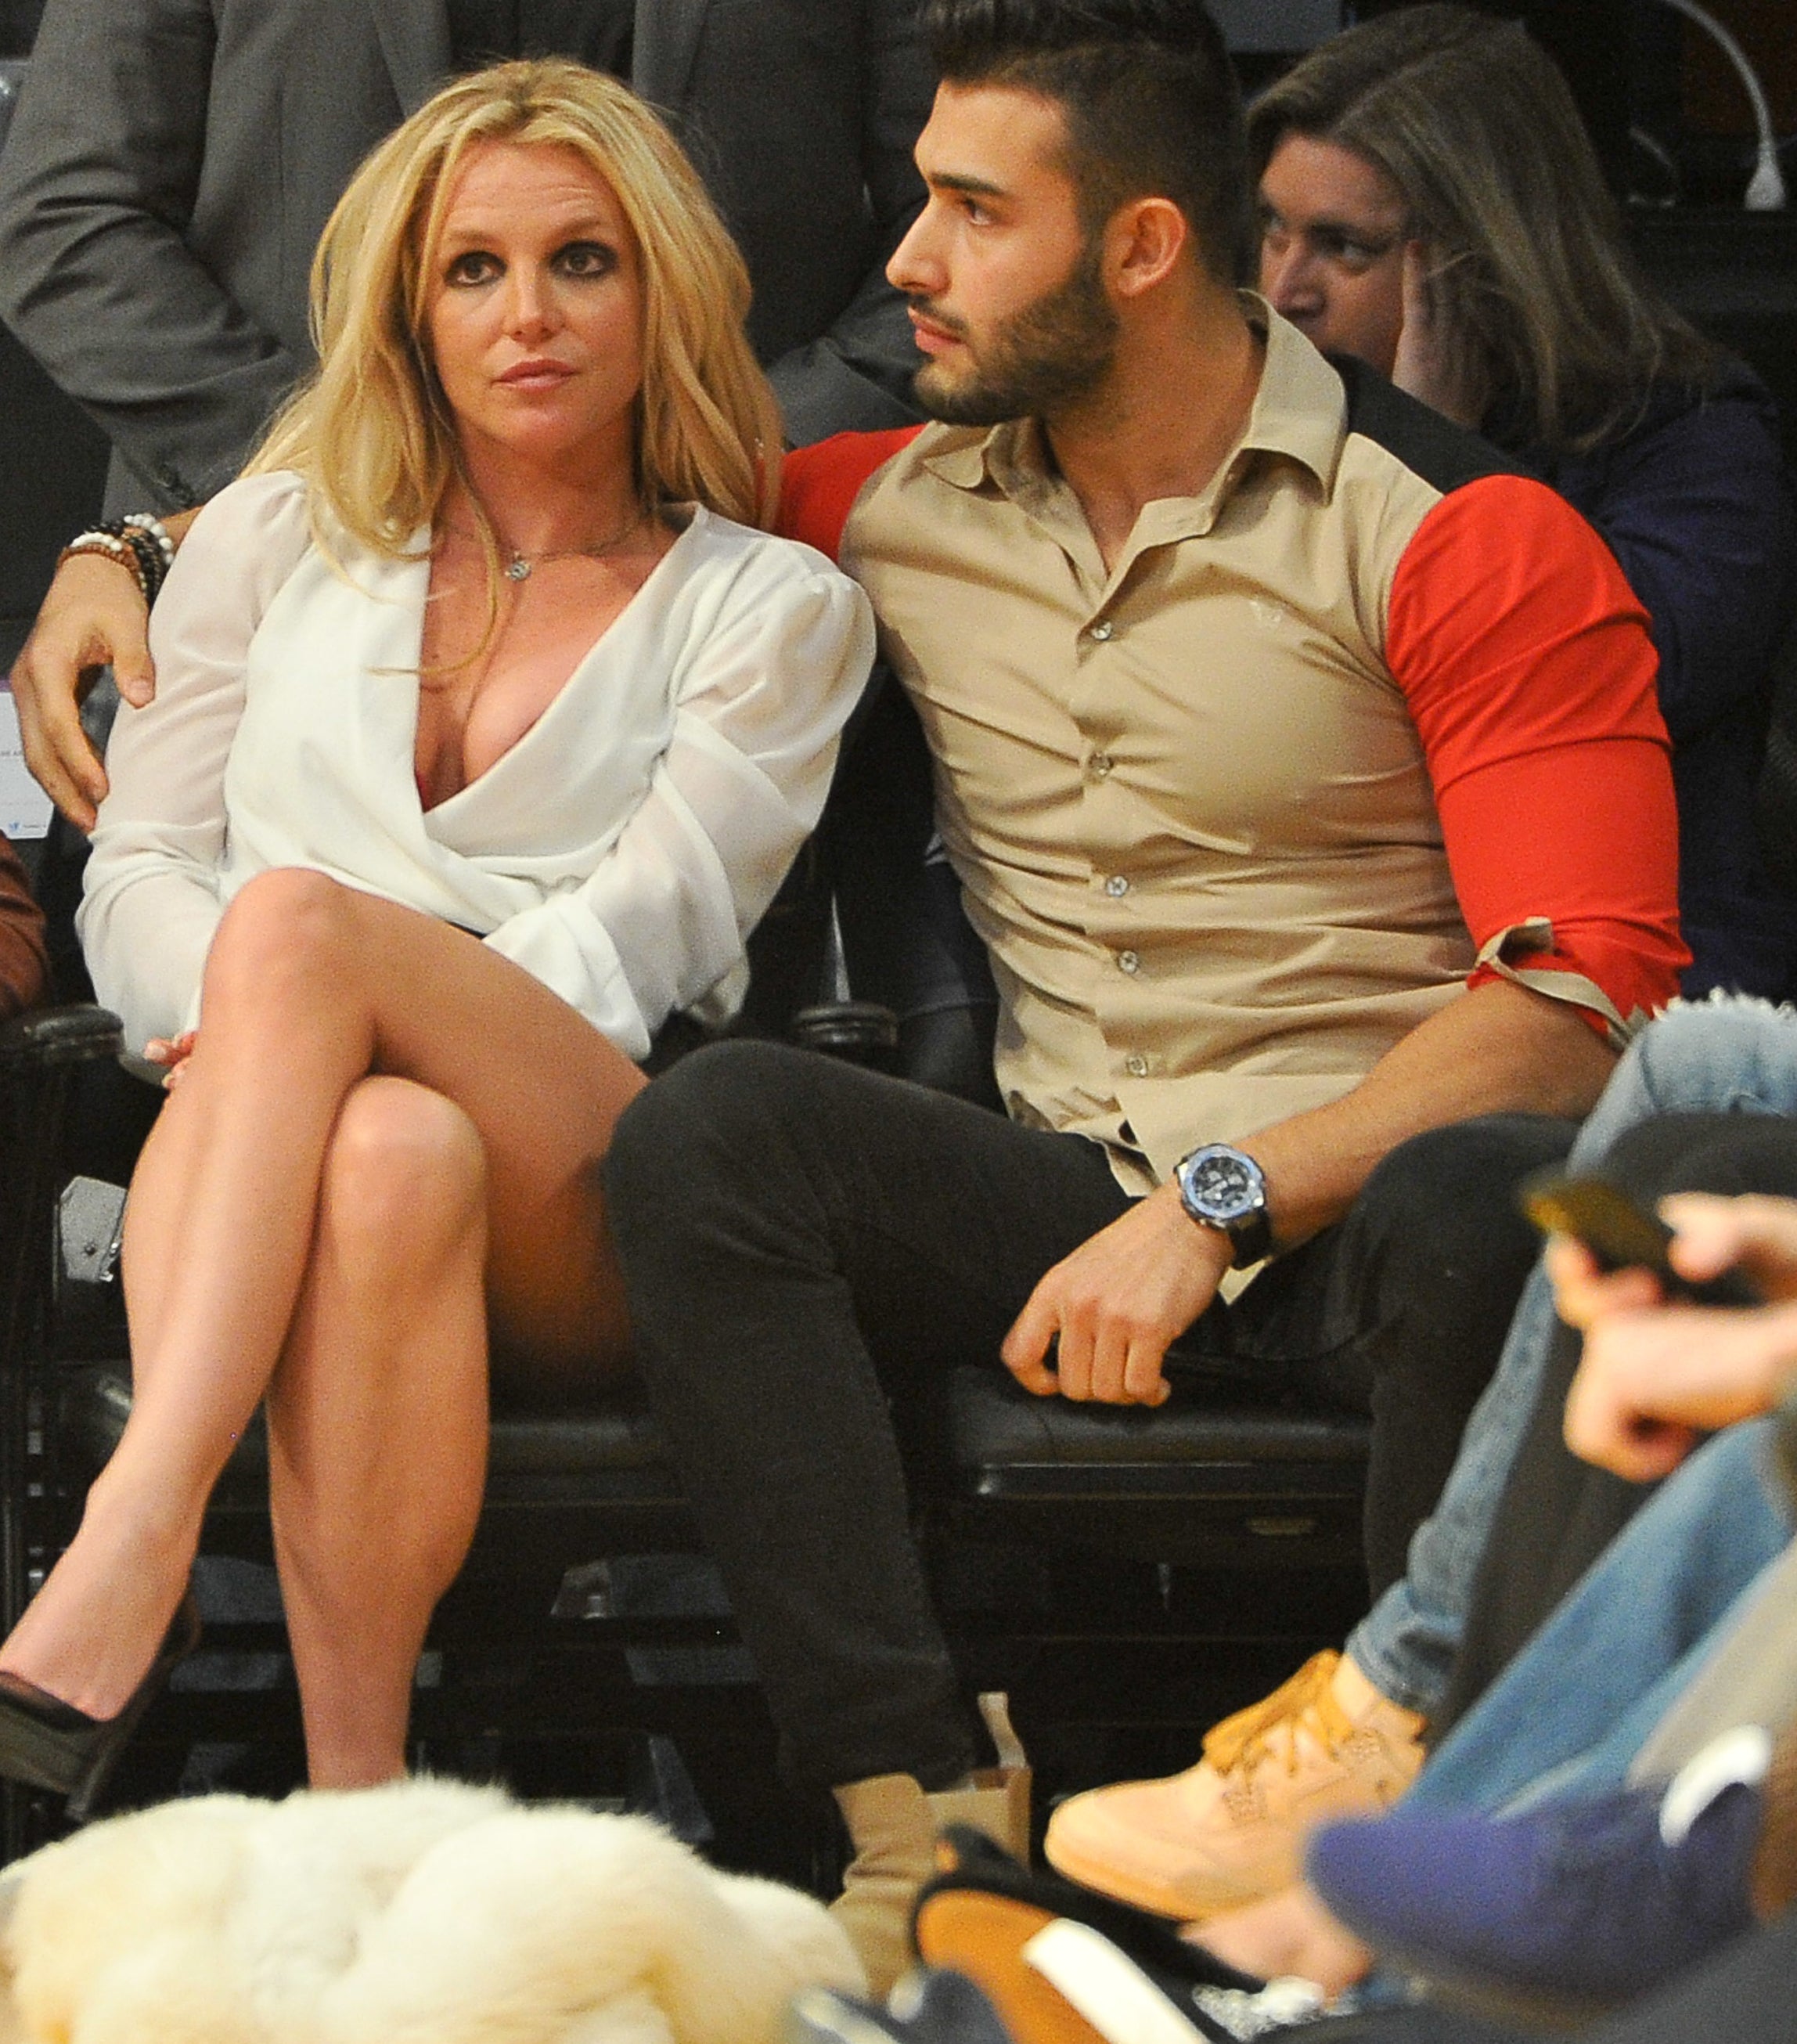 Close-up of Britney and Sam sitting together